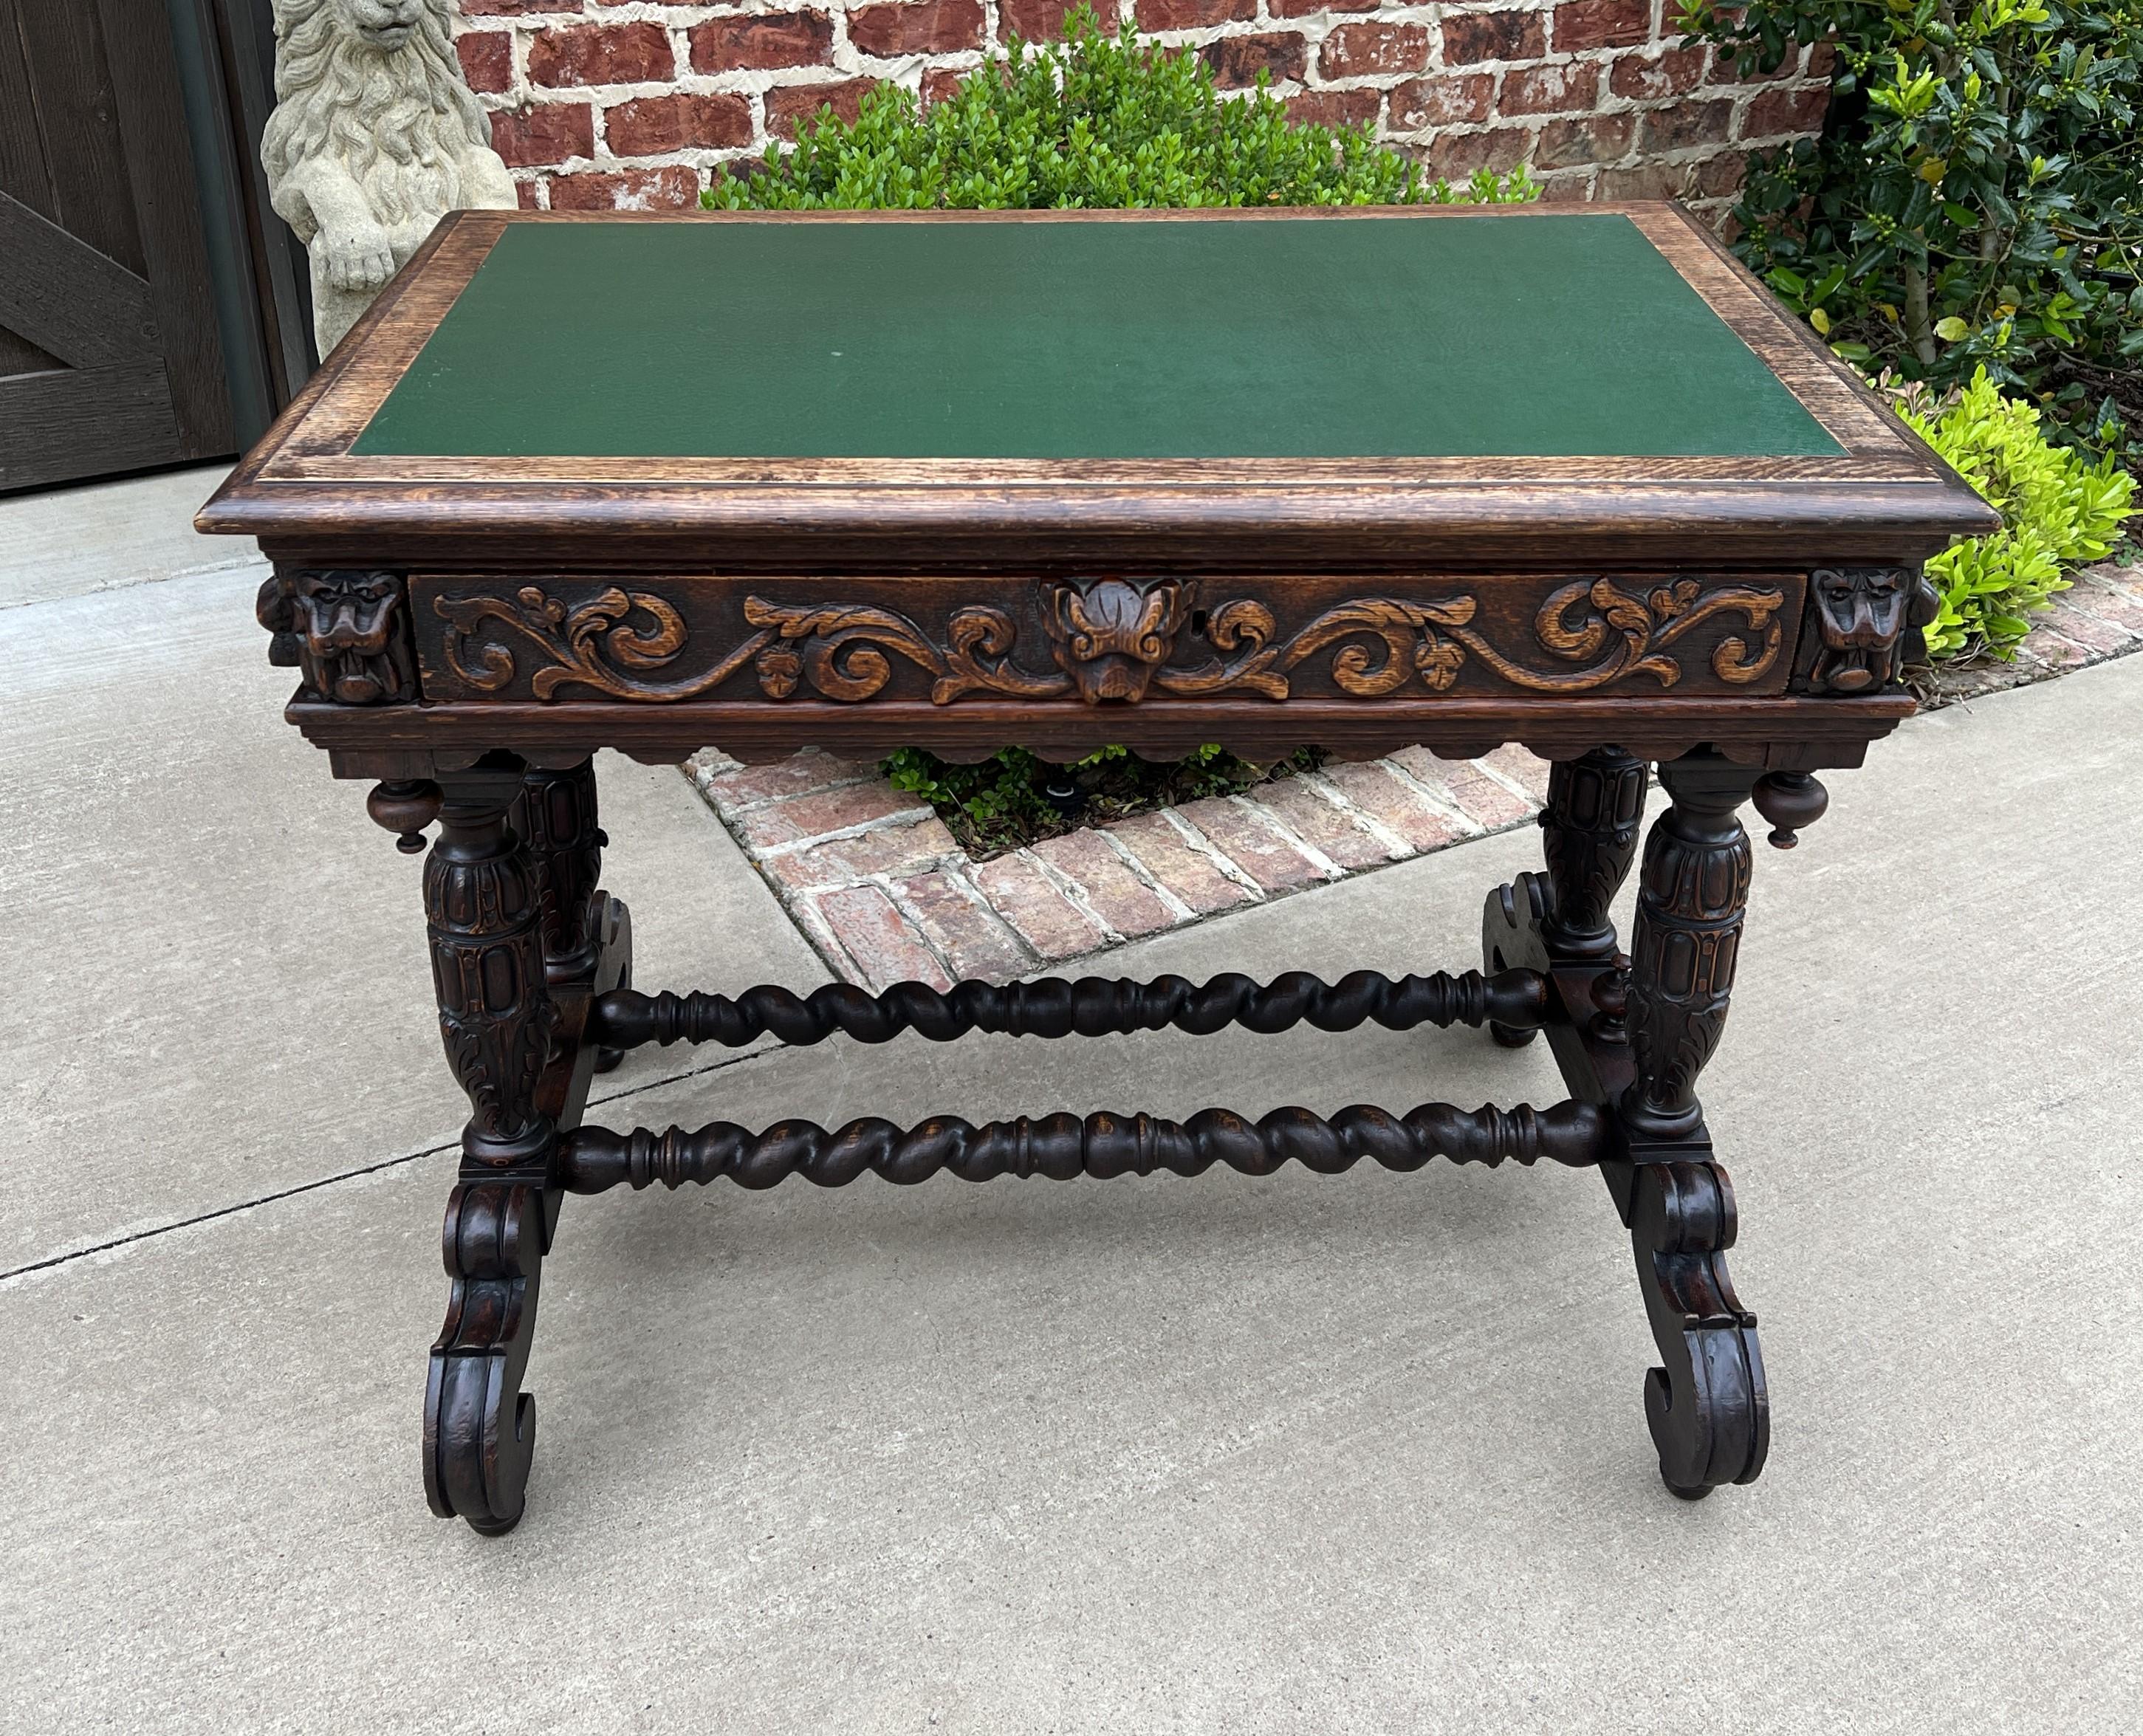 GORGEOUS Antique PETITE English carved oak desk or writing table with Drawer~~ Green Leather Top~~Double Barley Twist Stretcher~~HIGHLY CARVED.
~~circa 1880s 

With so many people working from home now, DESKS have become our most often requested